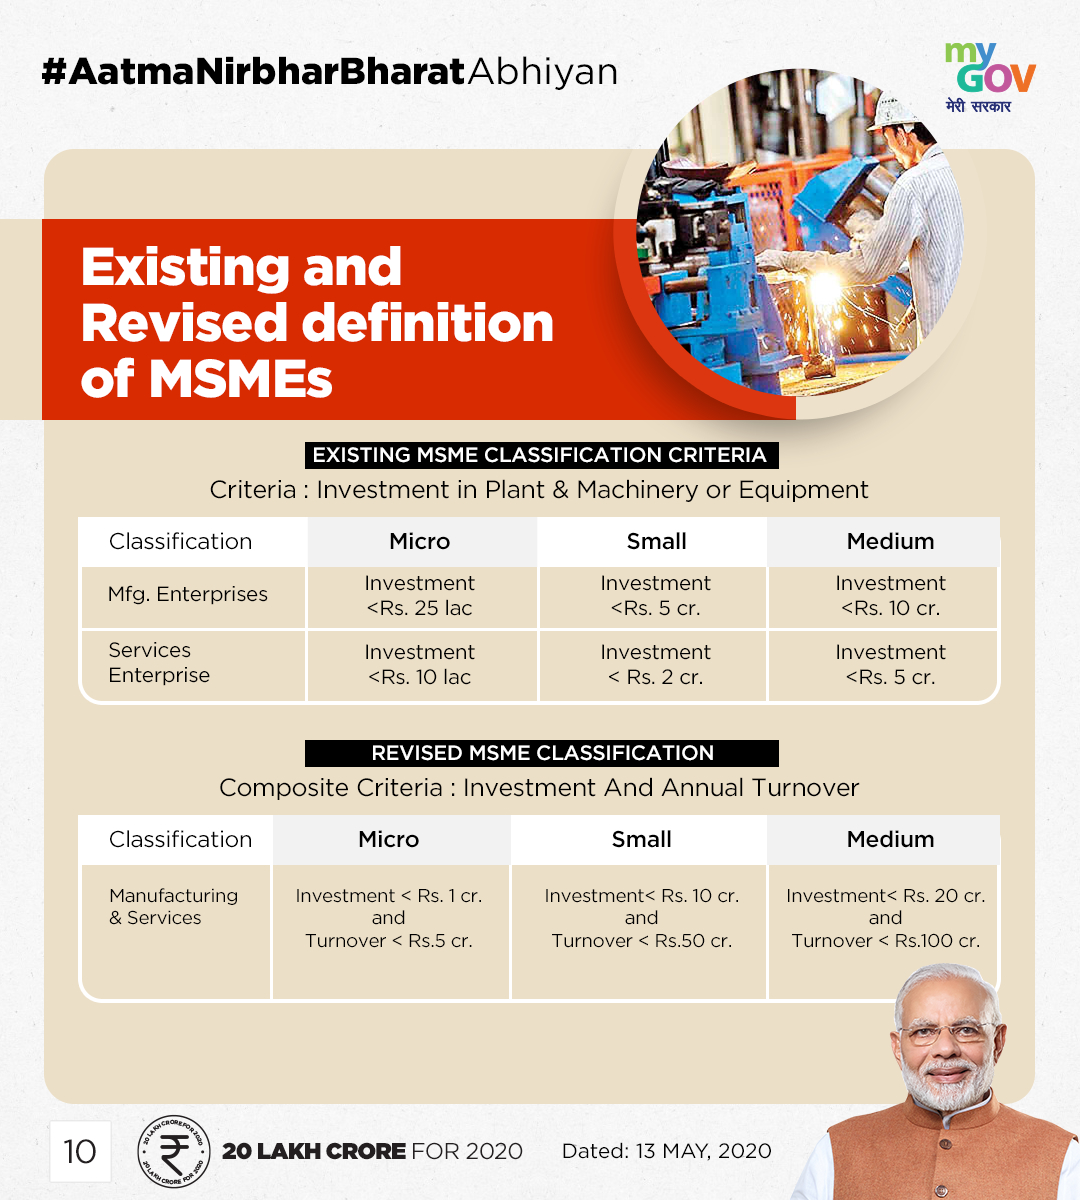 Existing and Revised definition of MSMEs